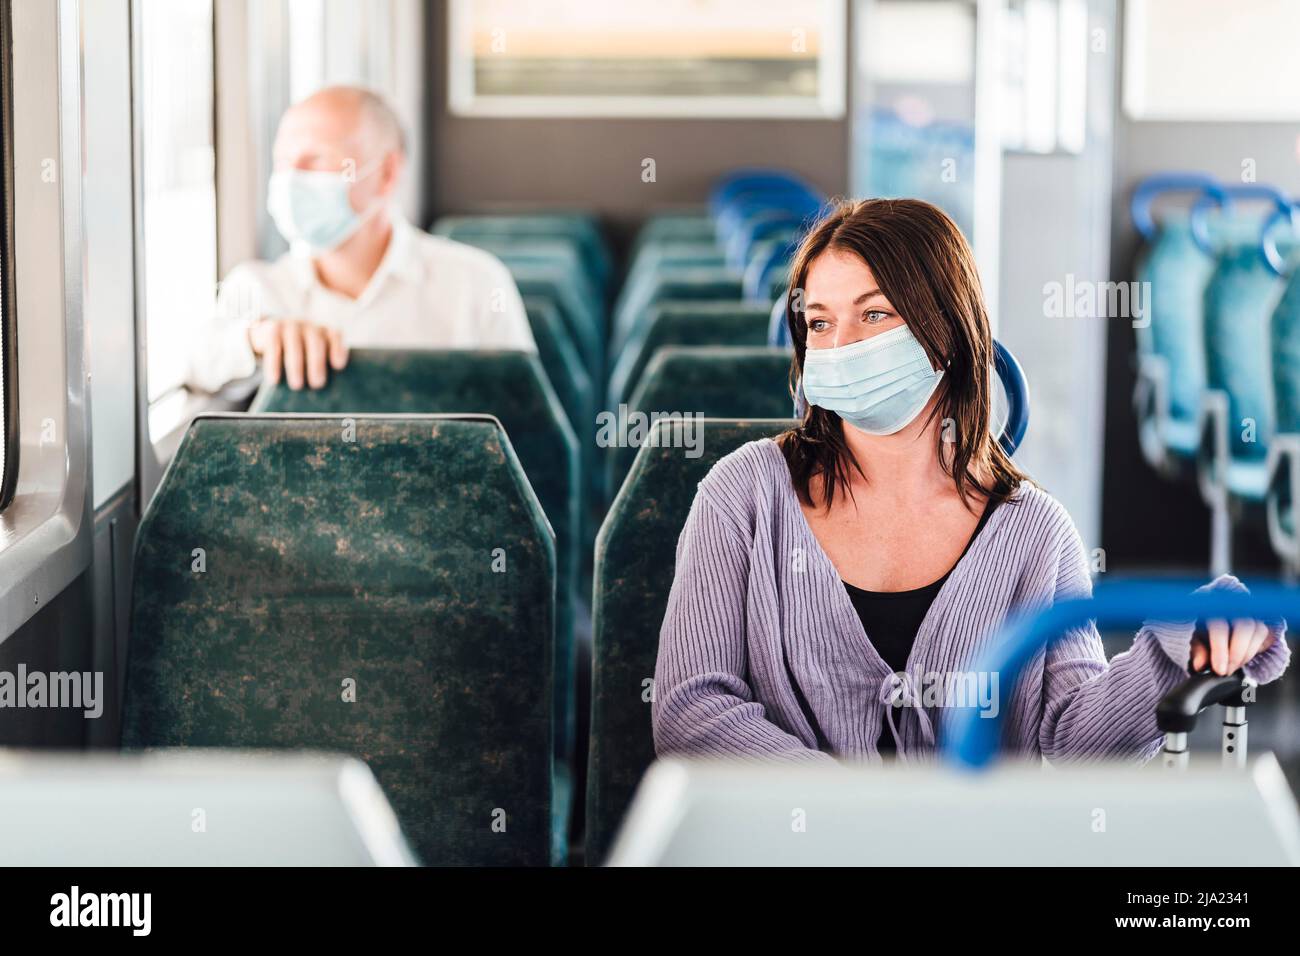 Serious passengers in protective masks during their train day trip Stock Photo